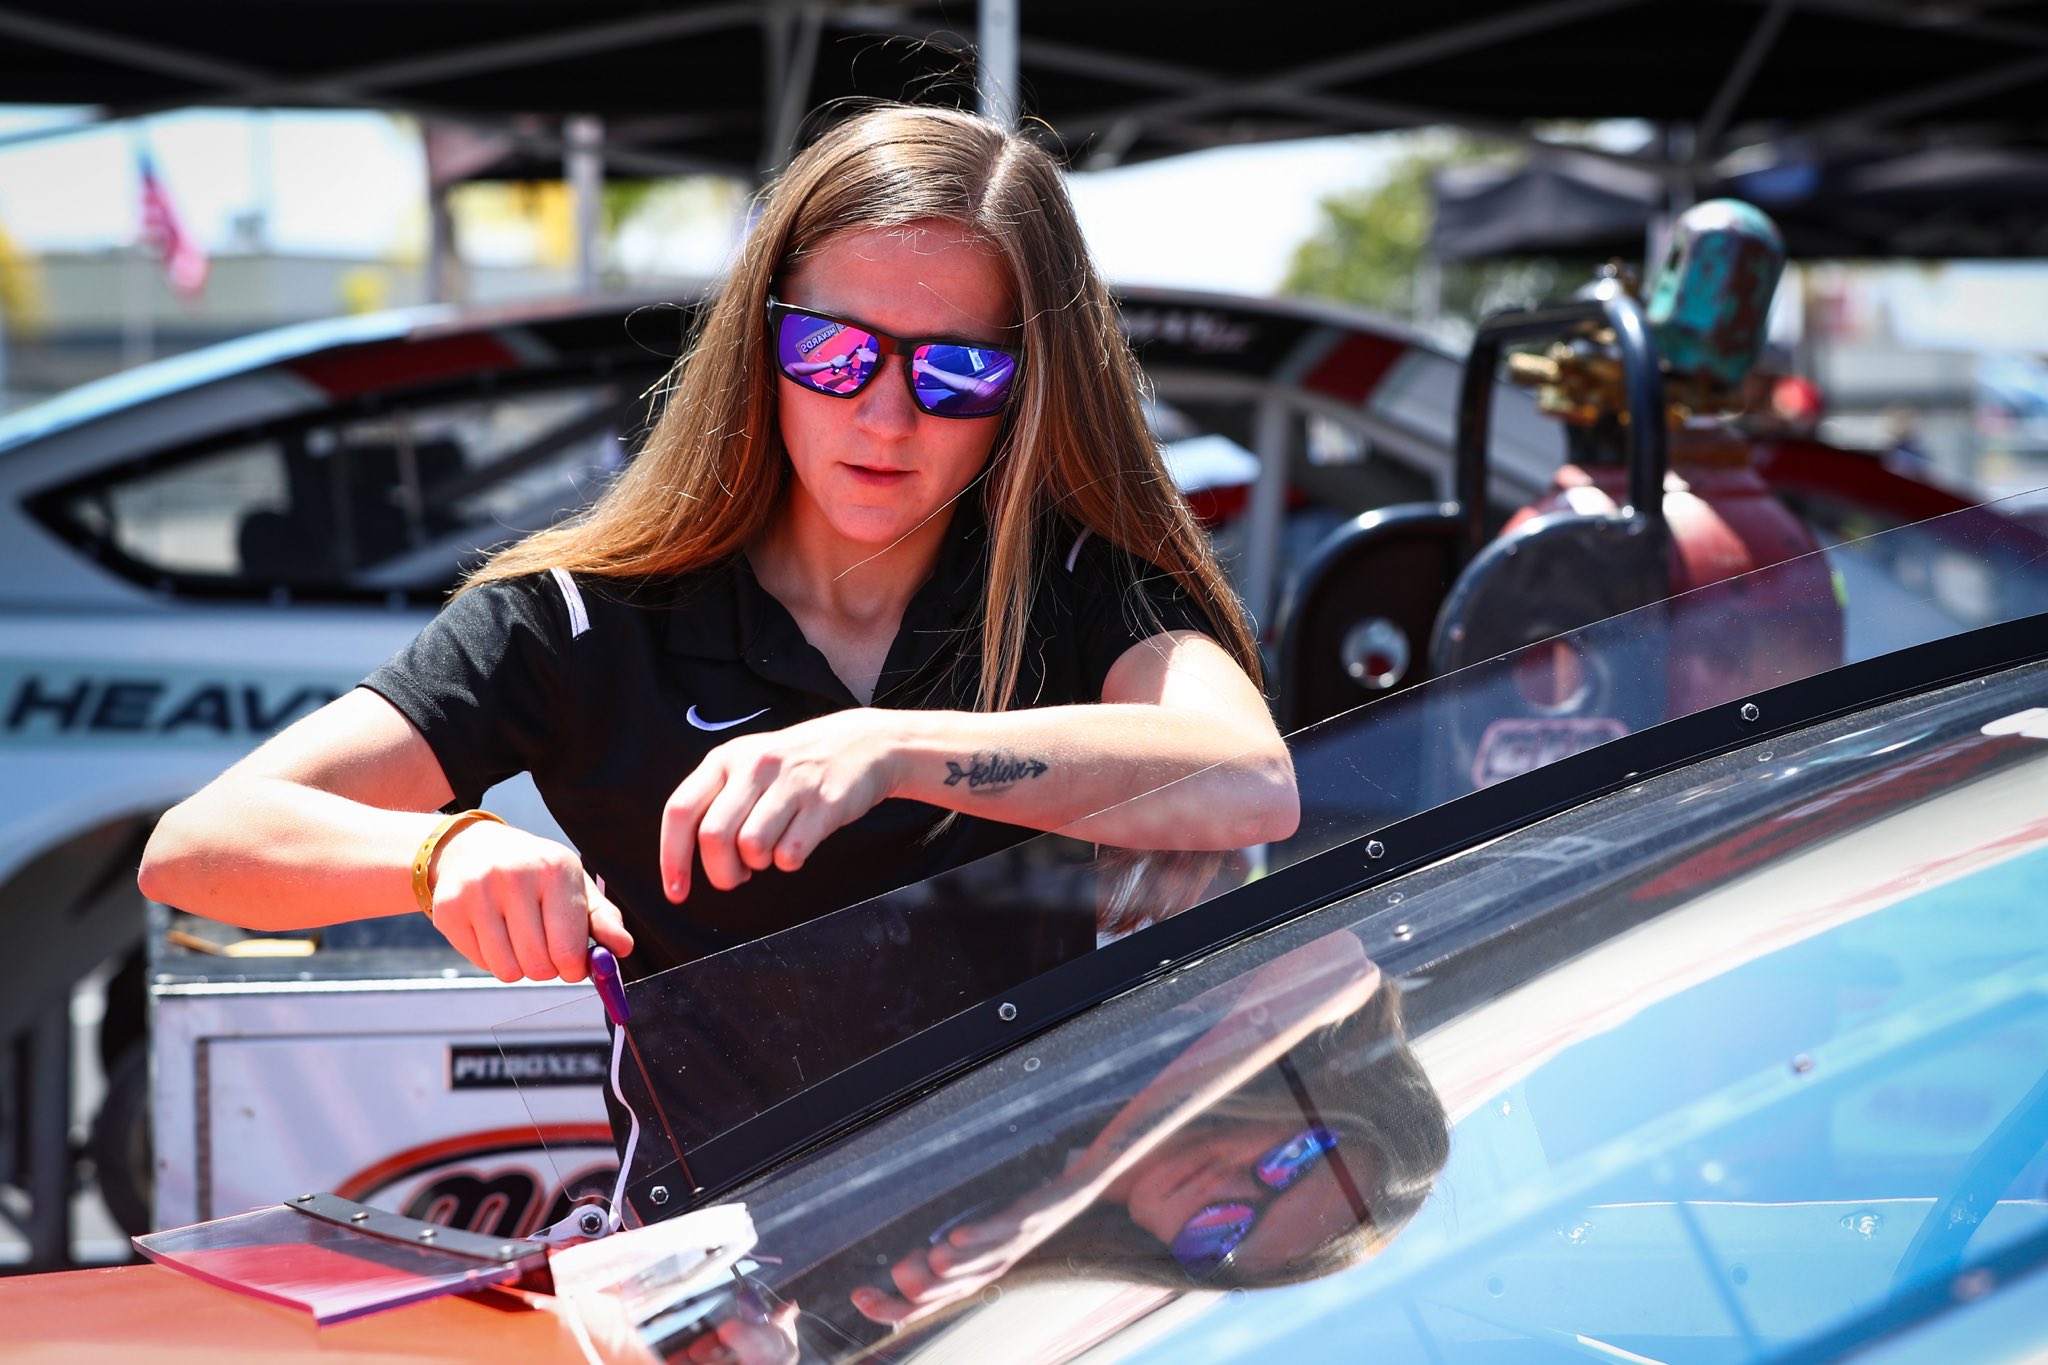 Slagle gets to work on her racecar with her sights set toward a bright future. (Photo: Amber Slagle via Twitter)